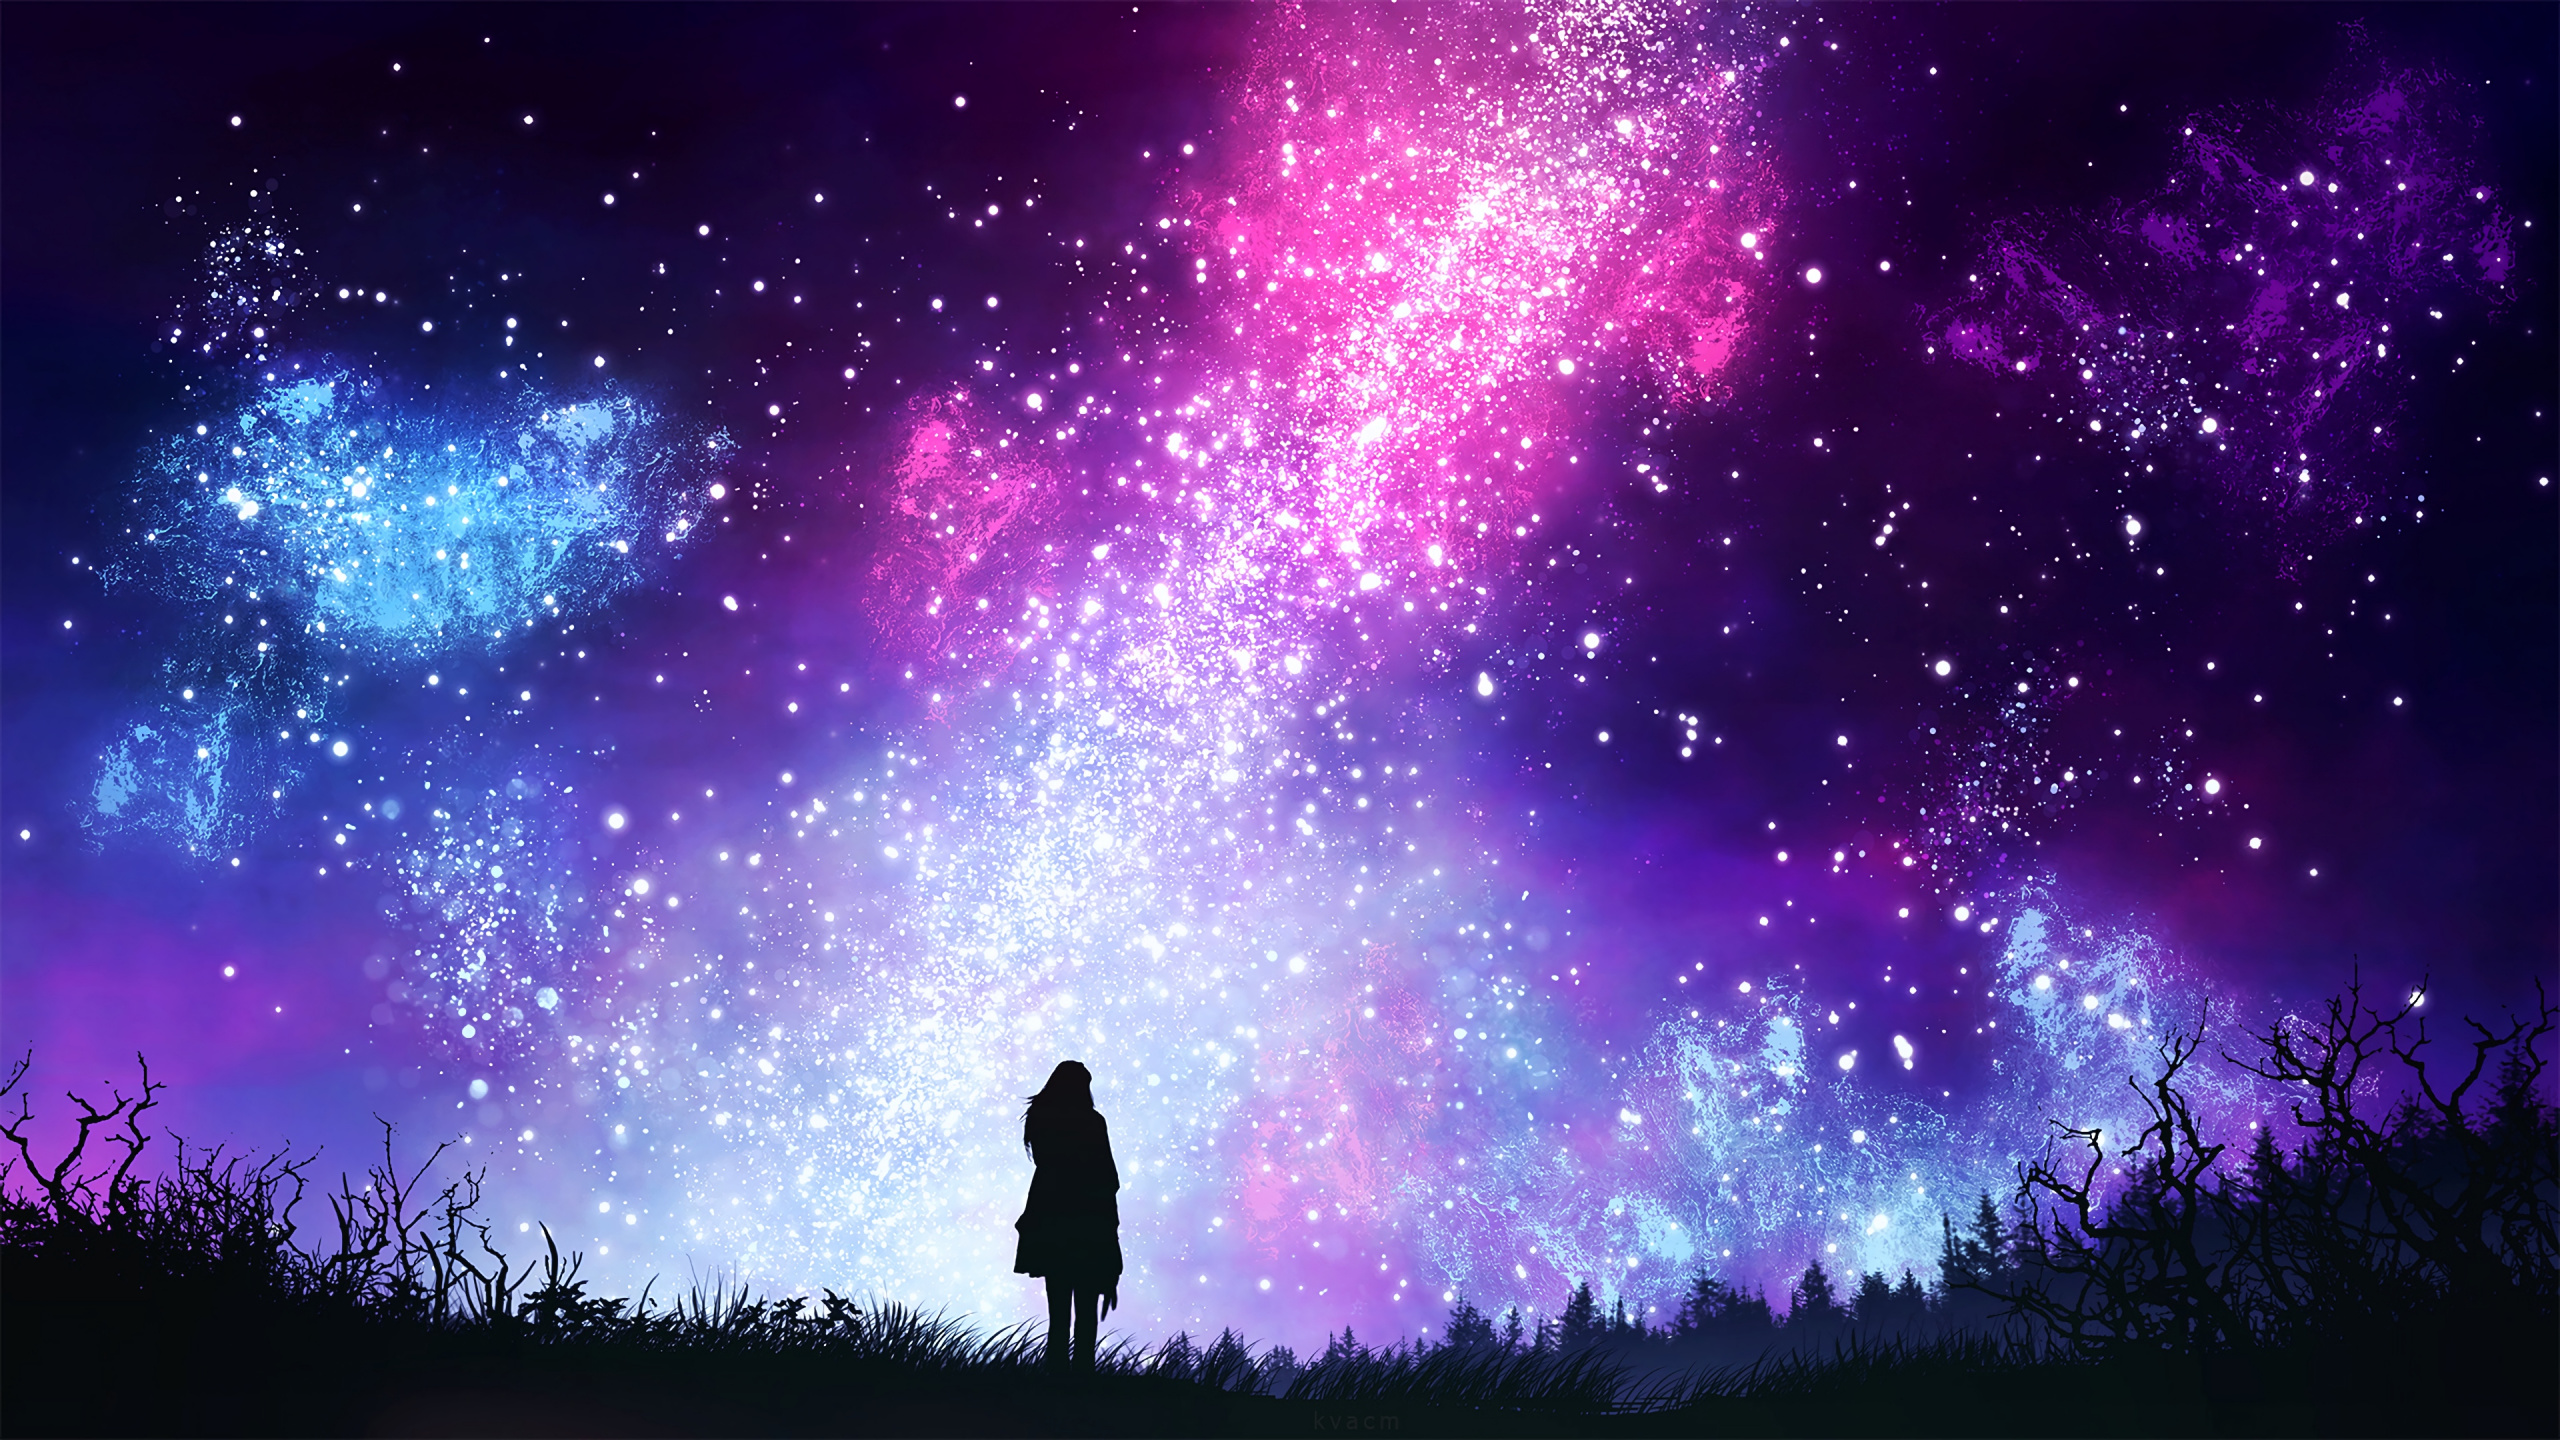 Silhouette of Man and Woman Under Purple Sky. Wallpaper in 2560x1440 Resolution